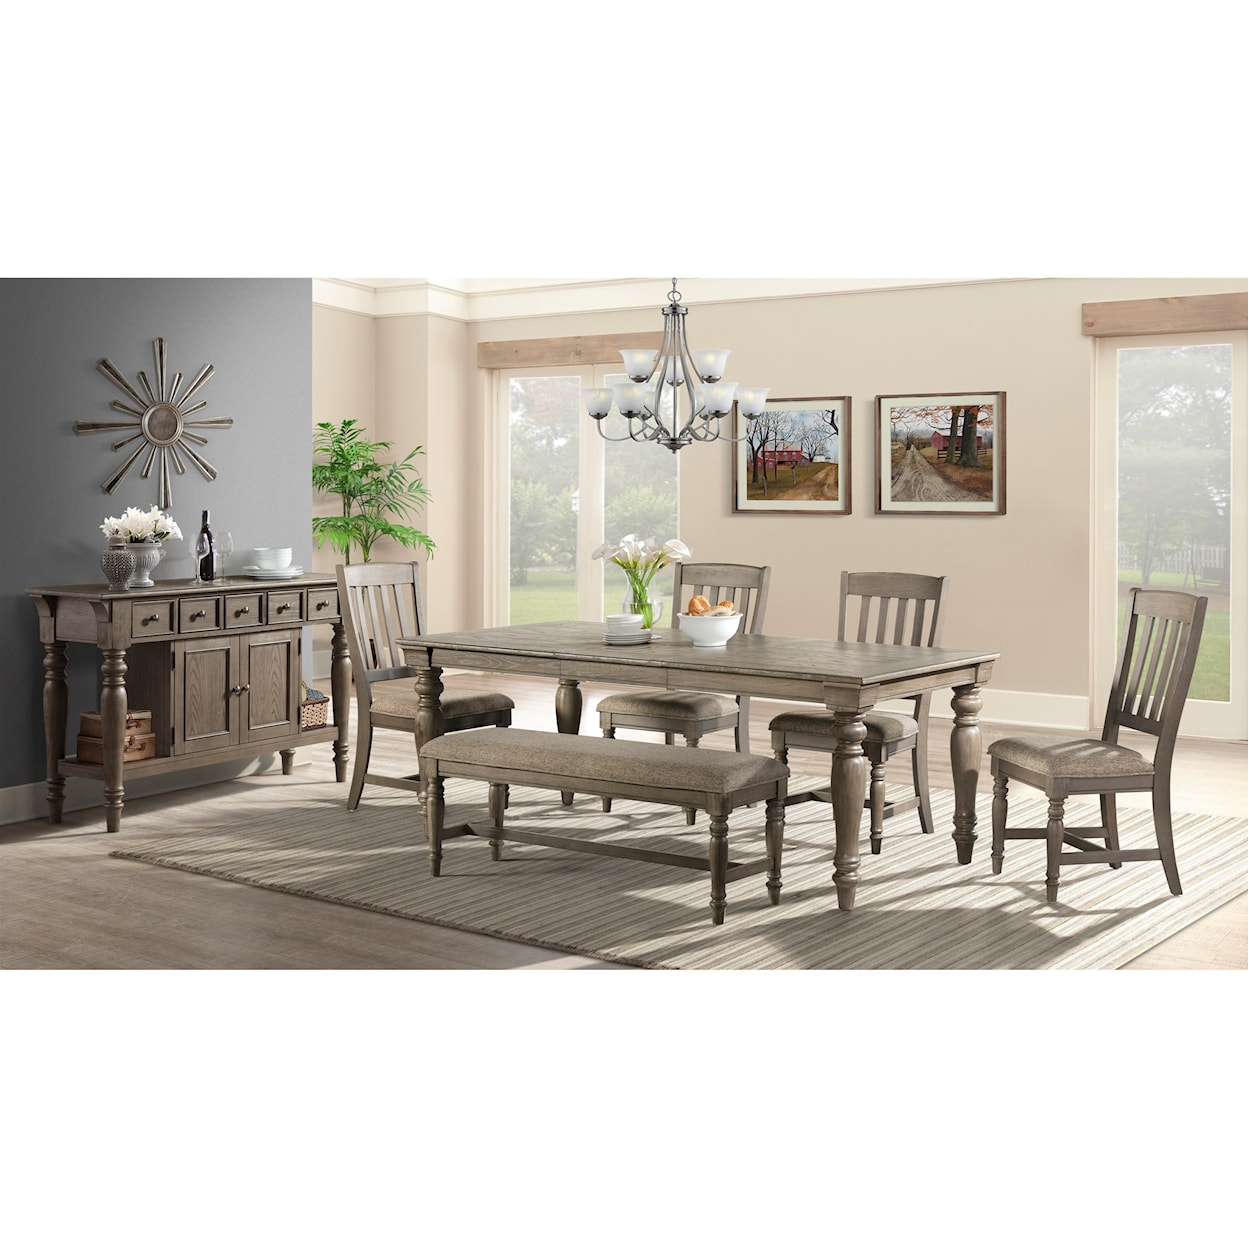 Intercon 11878 Formal Dining Group